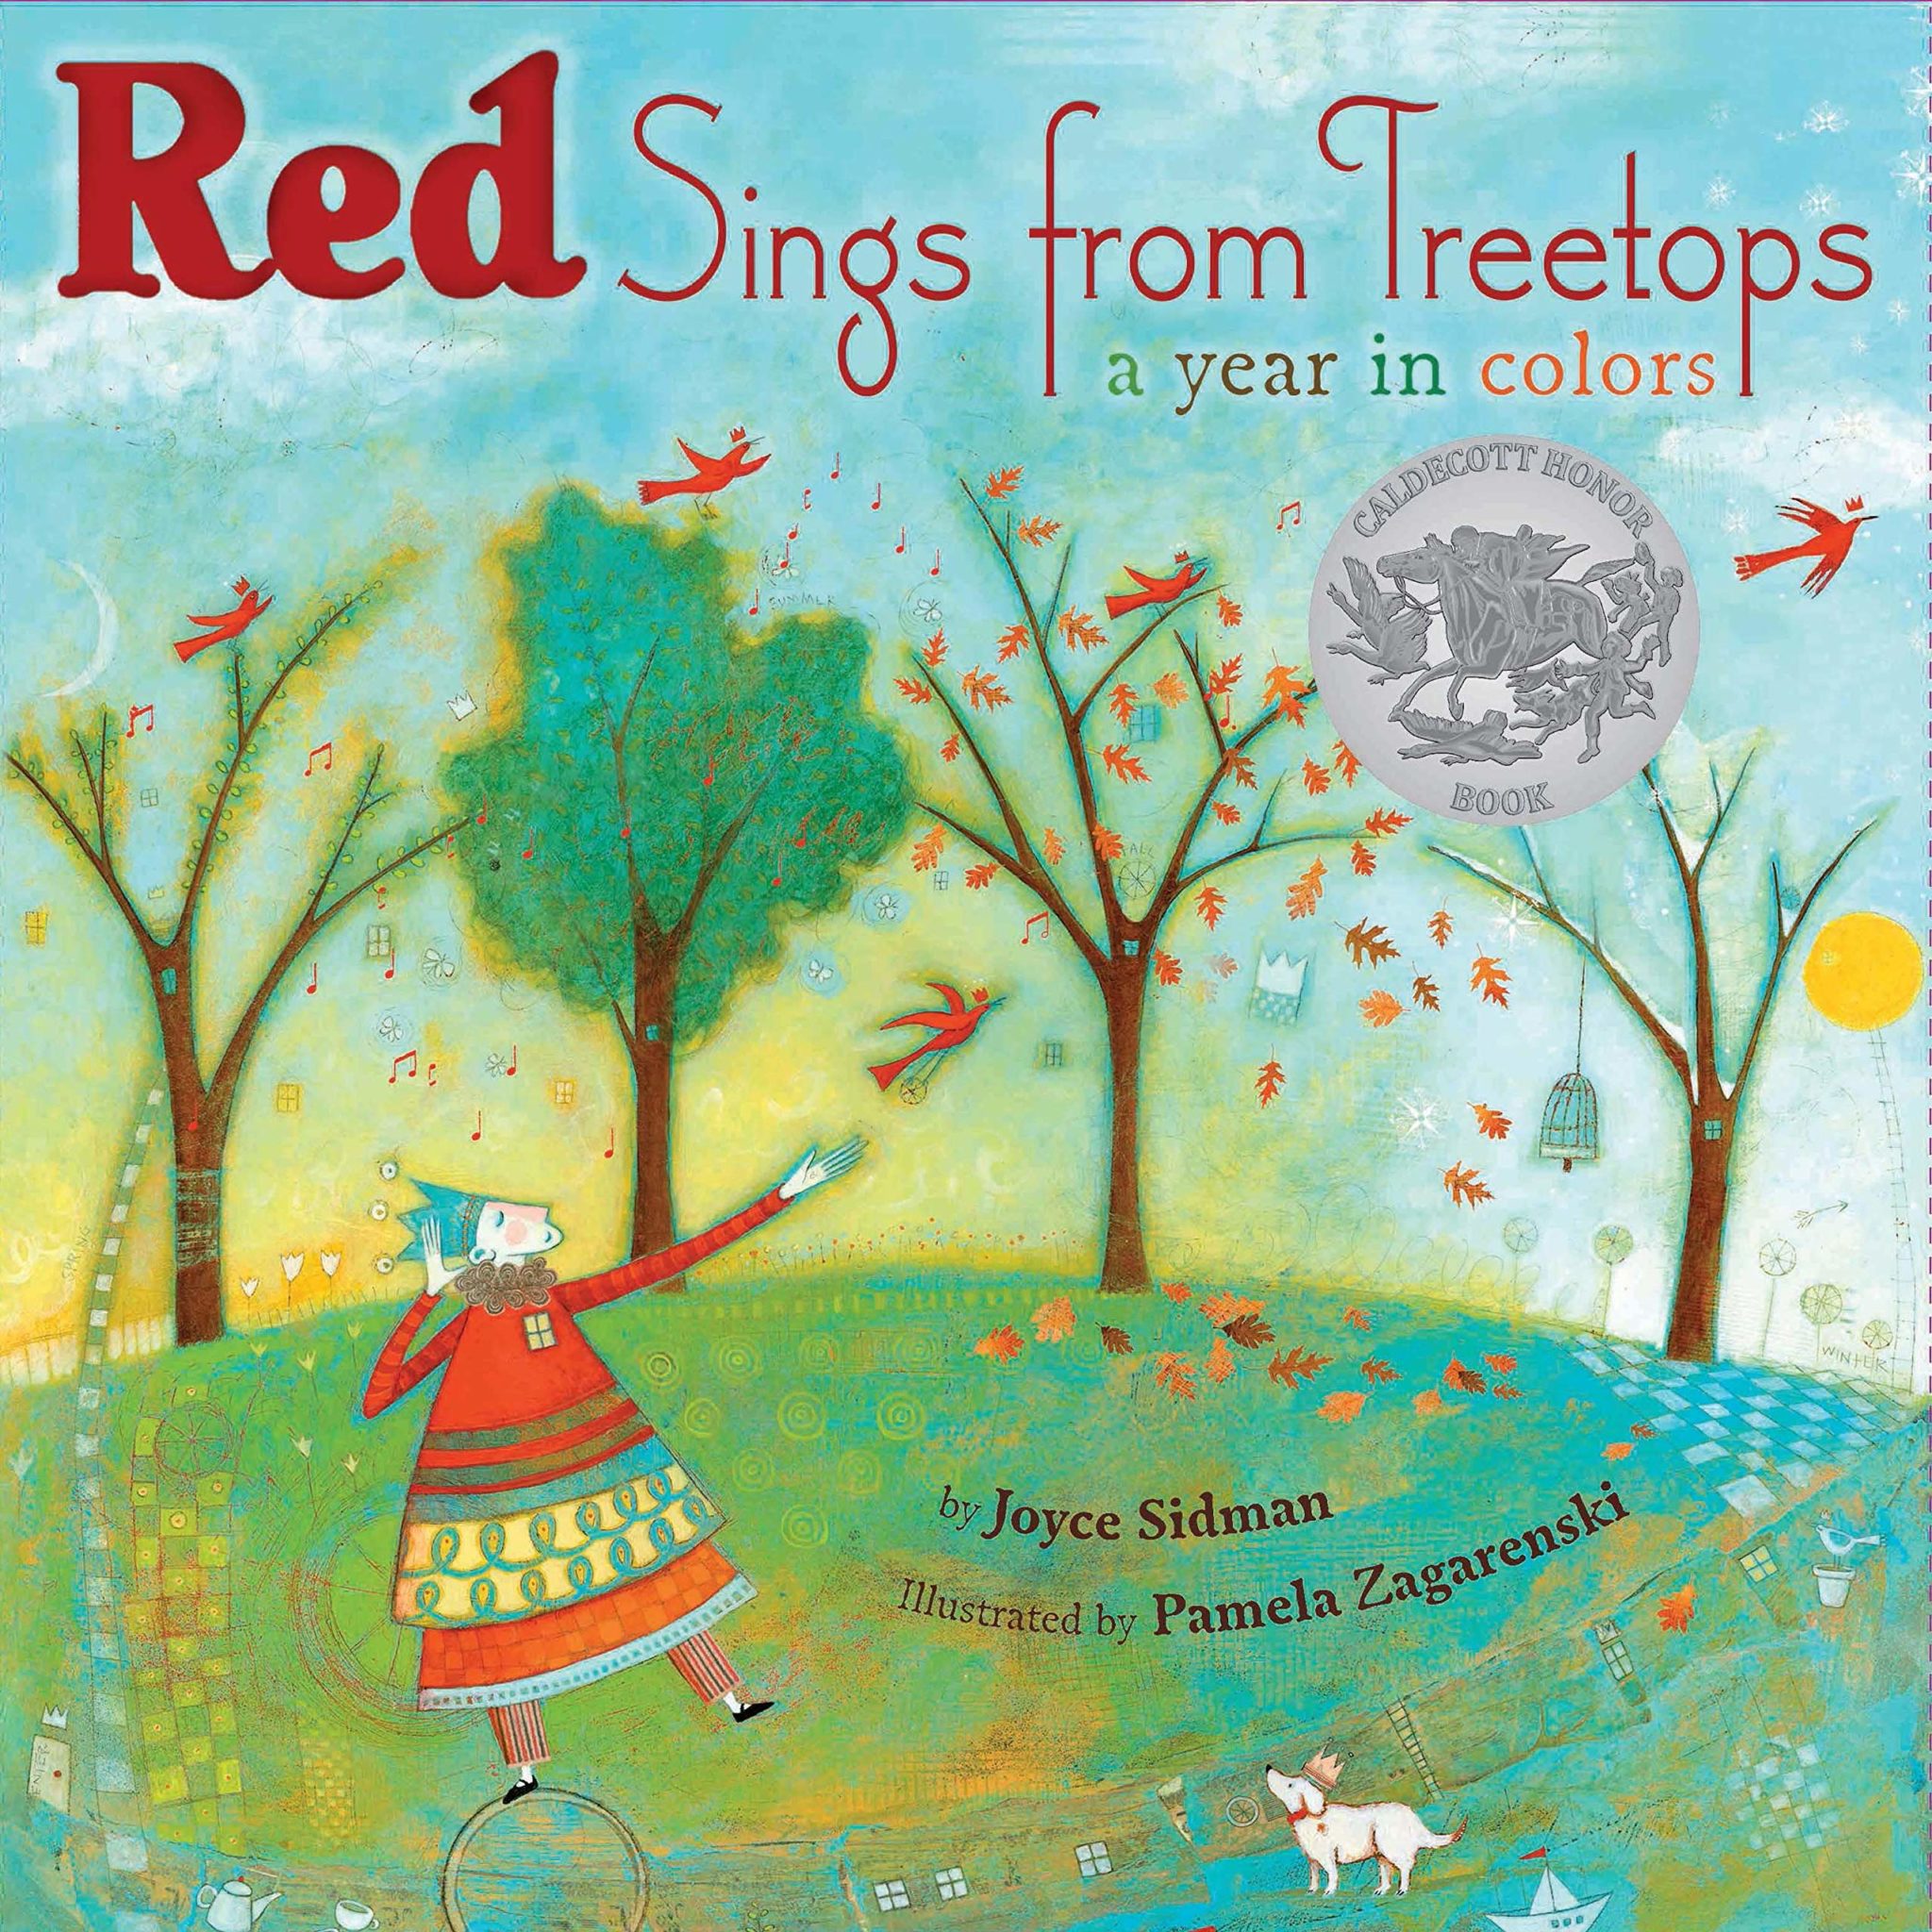 Cover of the book Red Sings from Treetops. A person wearing a crown and many-colored tunic frolics with red birds and a small white dog in an outdoor park.